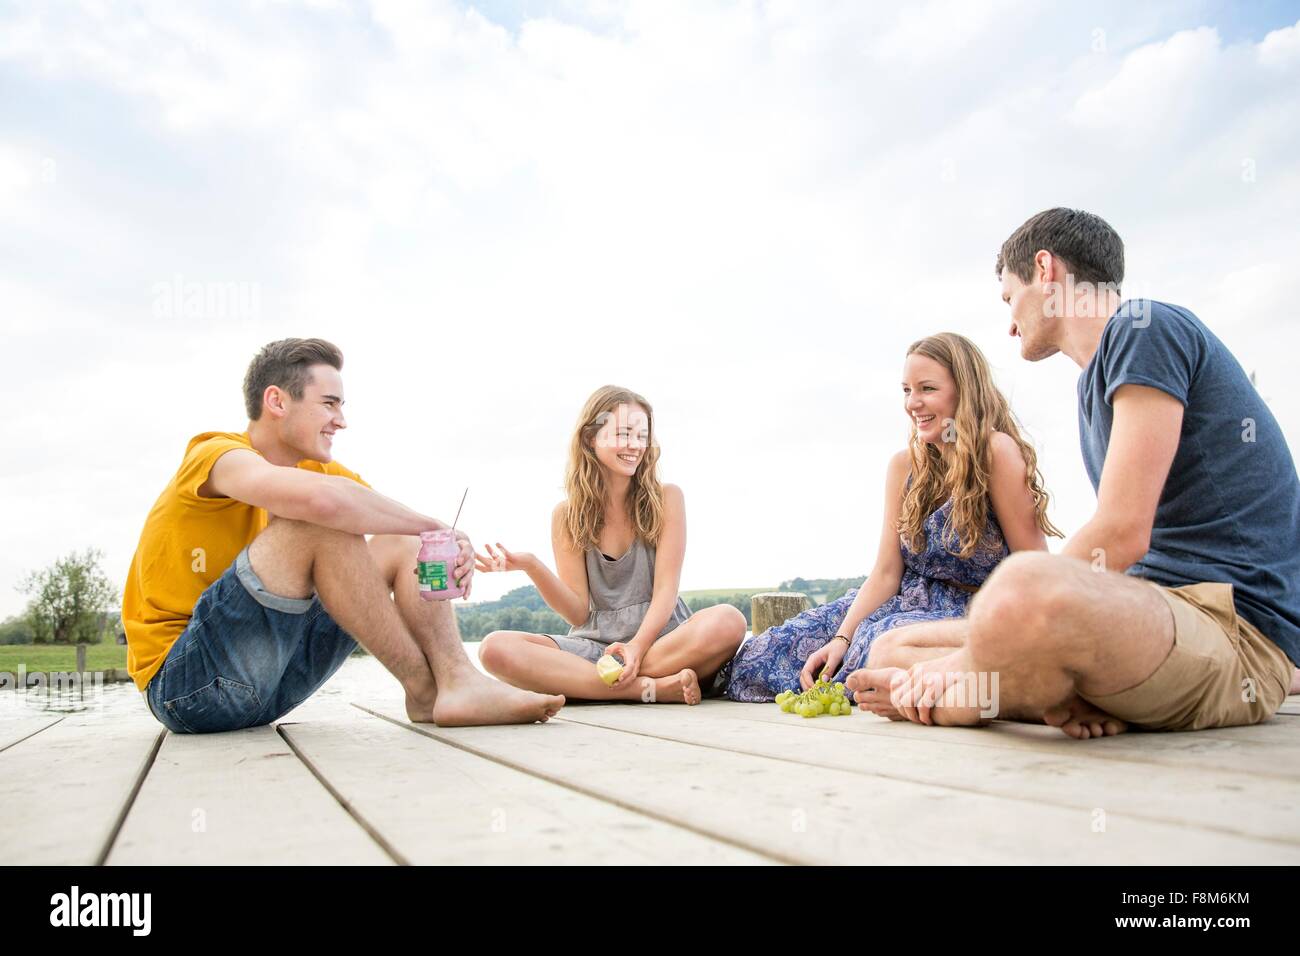 Group of young adults sitting on jetty, relaxing Stock Photo